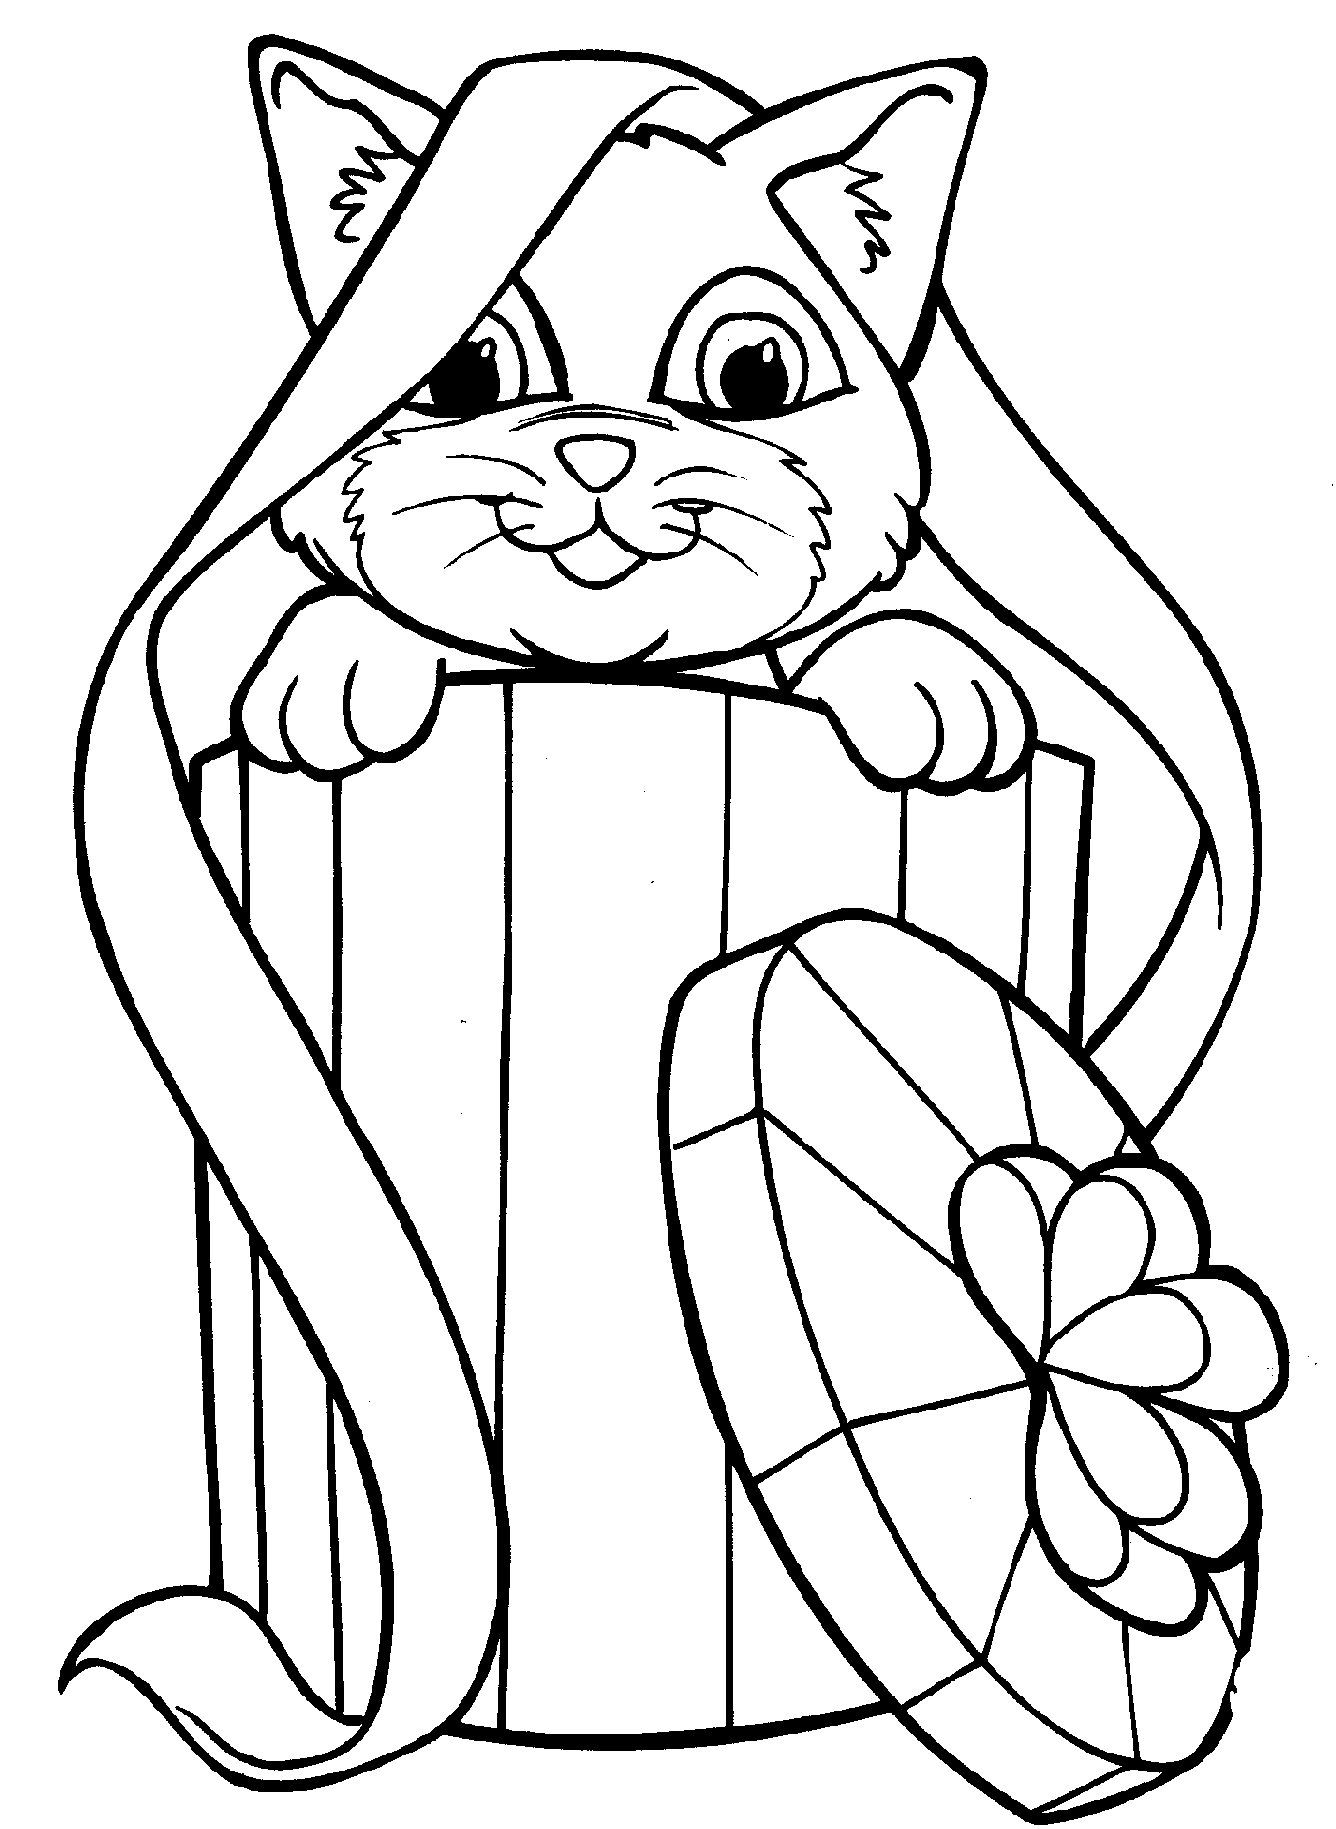 kitty cat coloring pages free printable kitten coloring pages for kids best kitty pages coloring cat 